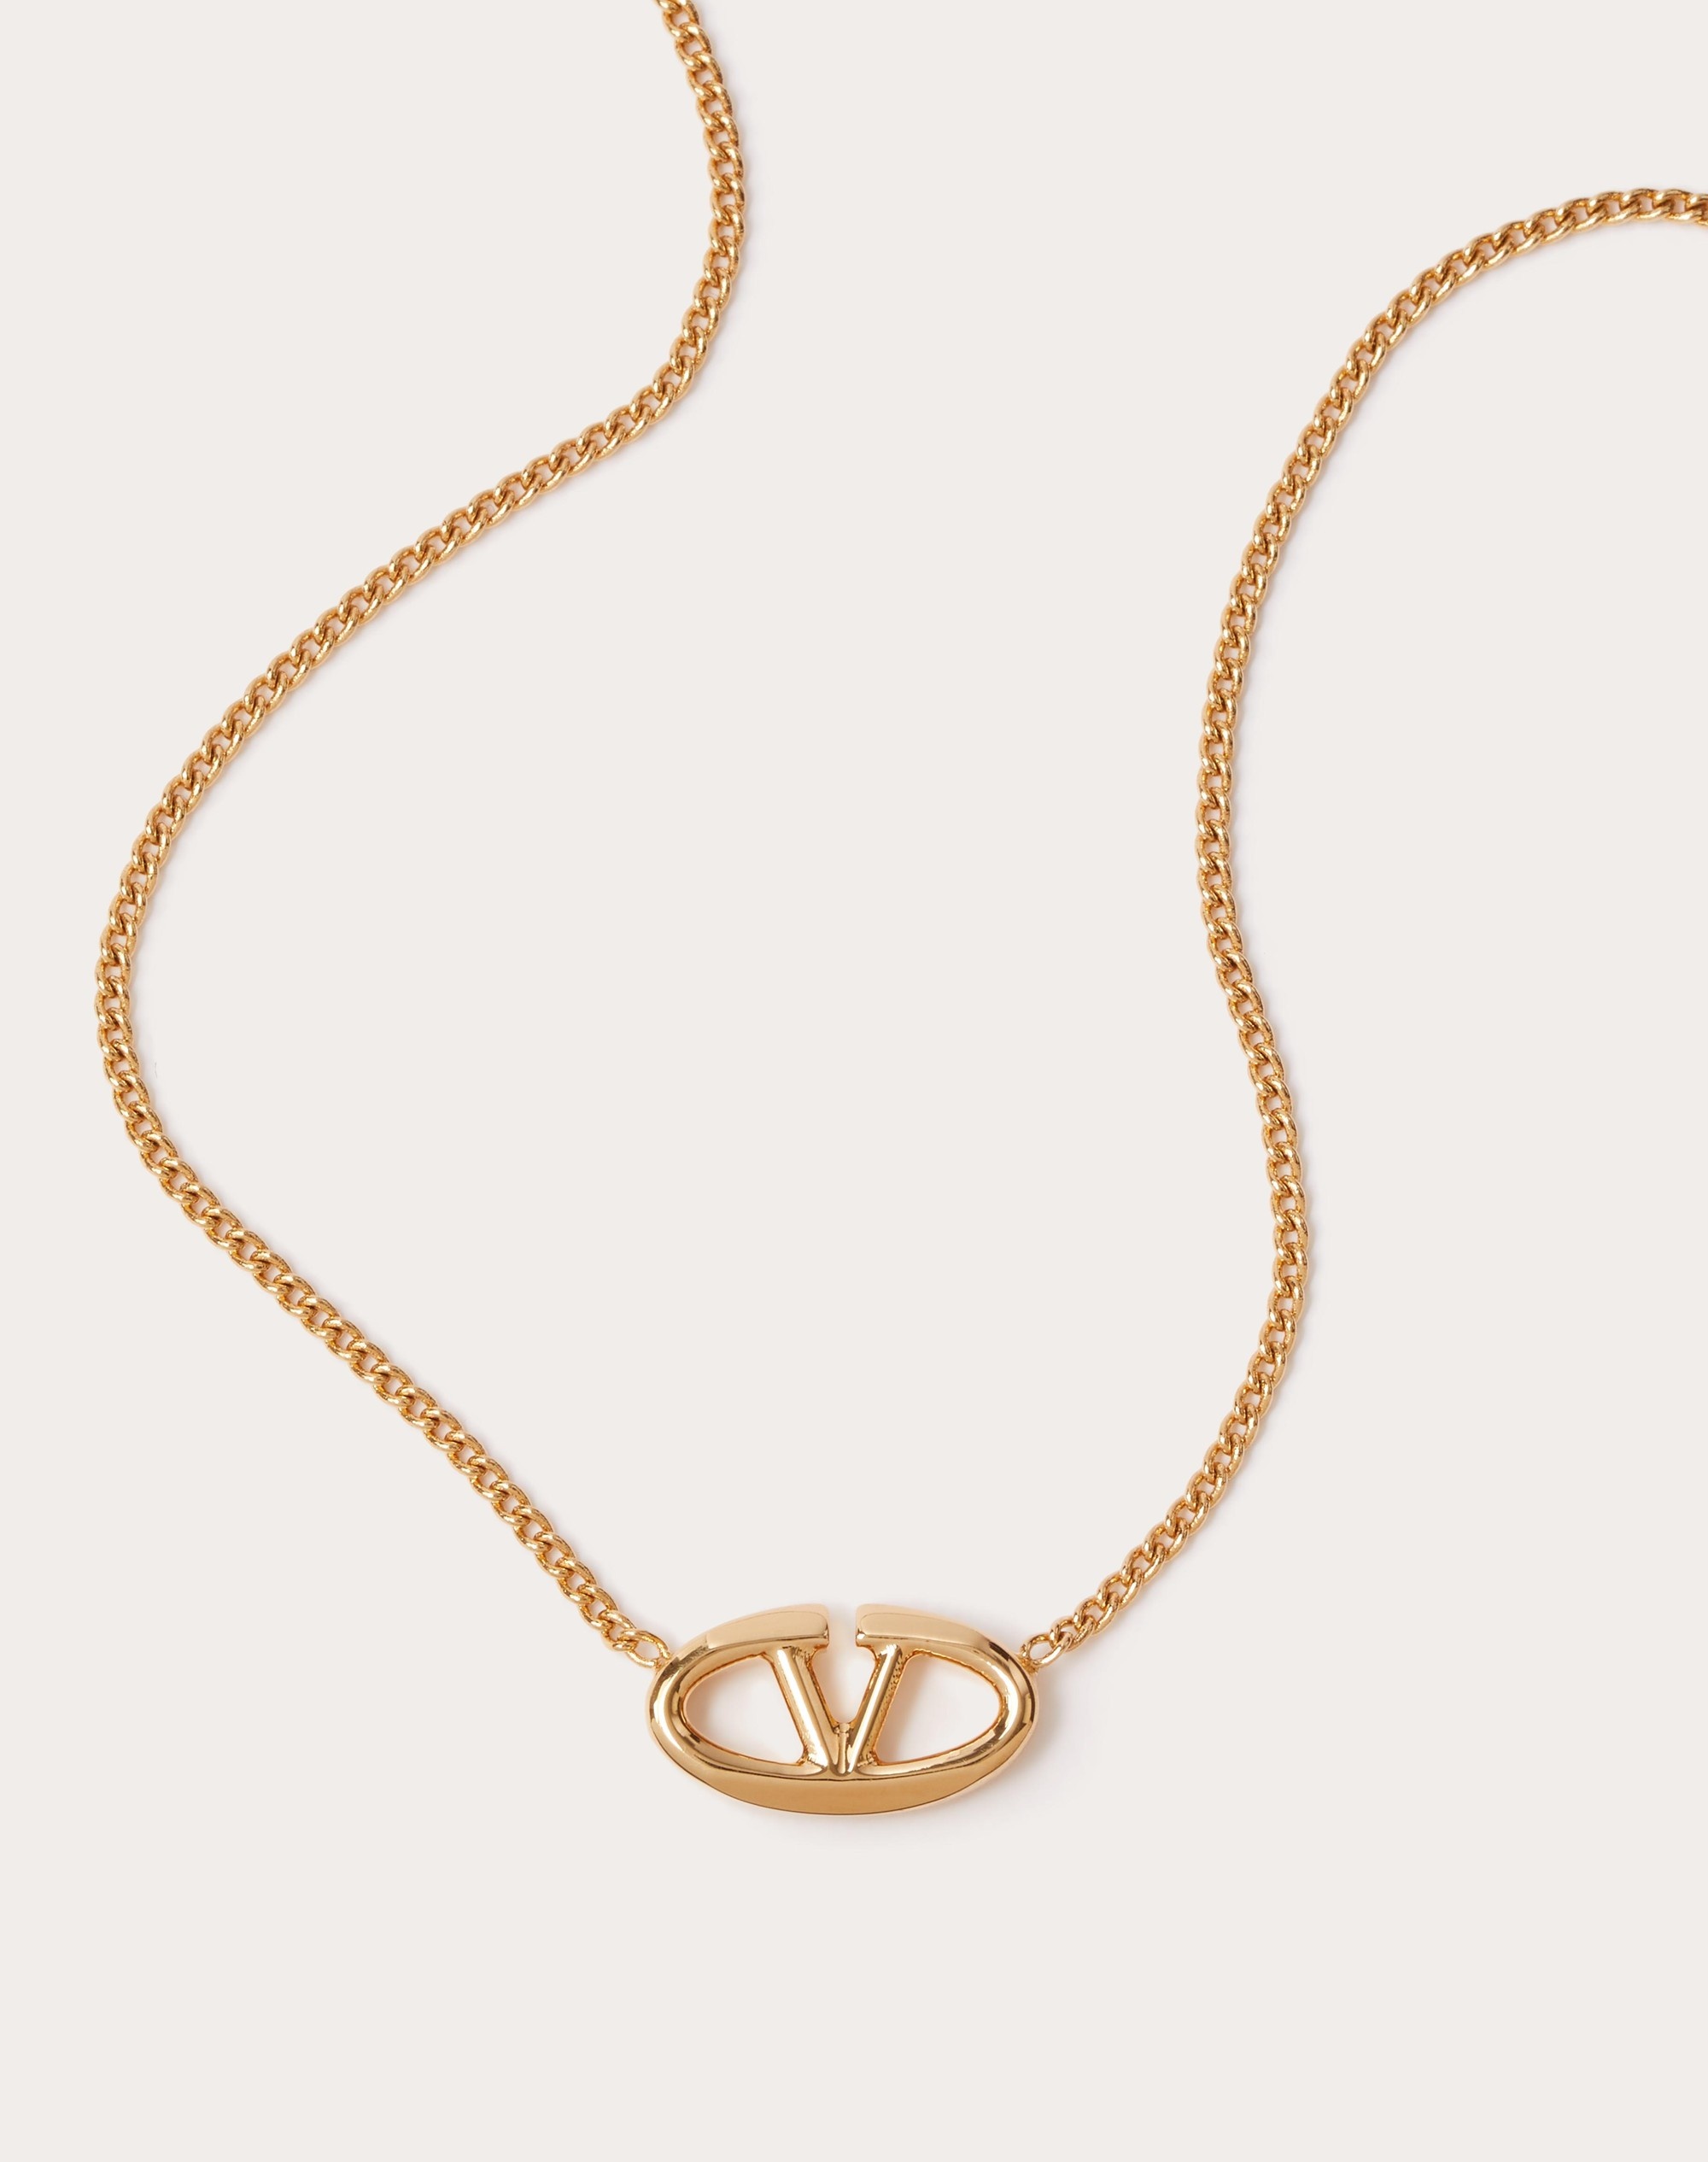 VLOGO THE BOLD EDITION METAL NECKLACE - 2